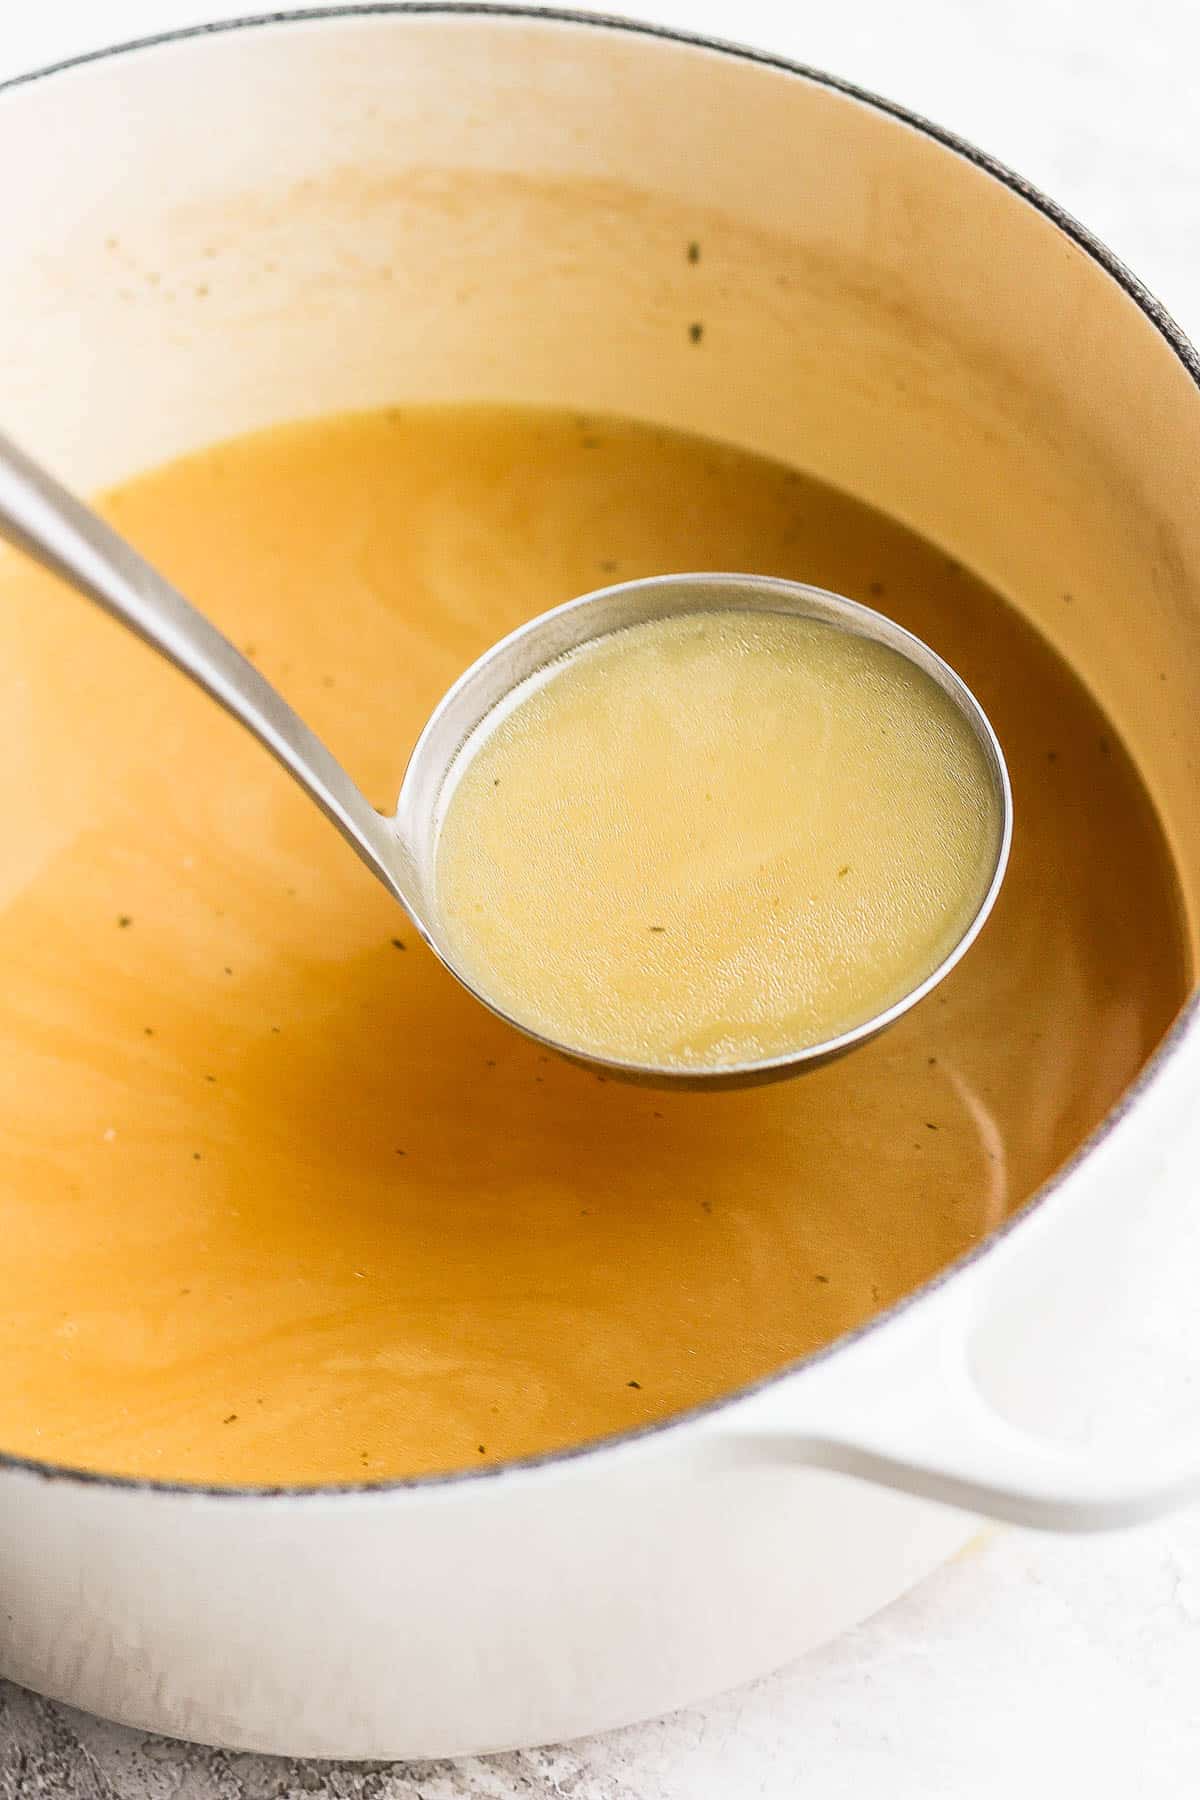 A ladle scooping turkey broth out of the pot.